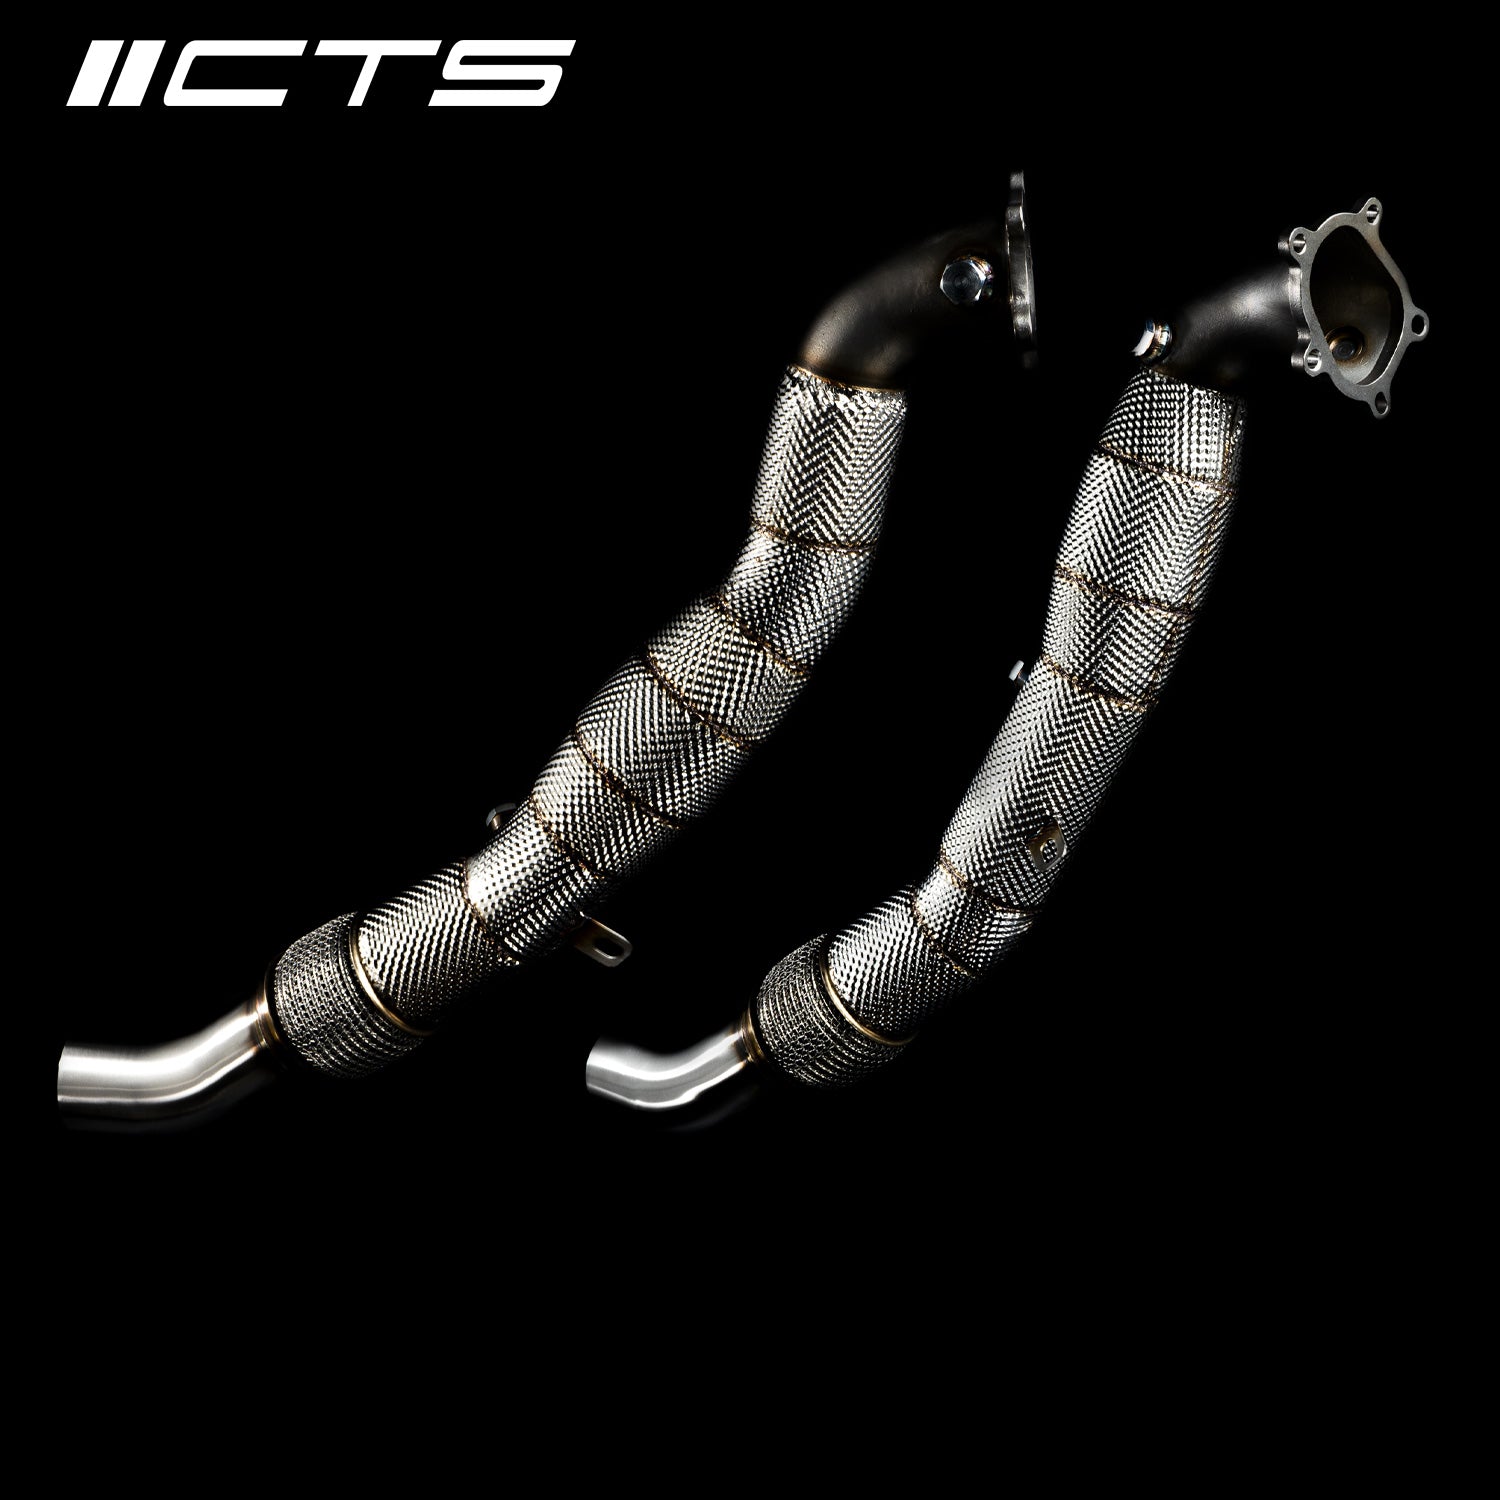 CTS TURBO AUDI C7/C7.5 S6/S7/RS7 4.0T CAST DOWNPIPE SET WITH HIGH FLOW CATS - 0